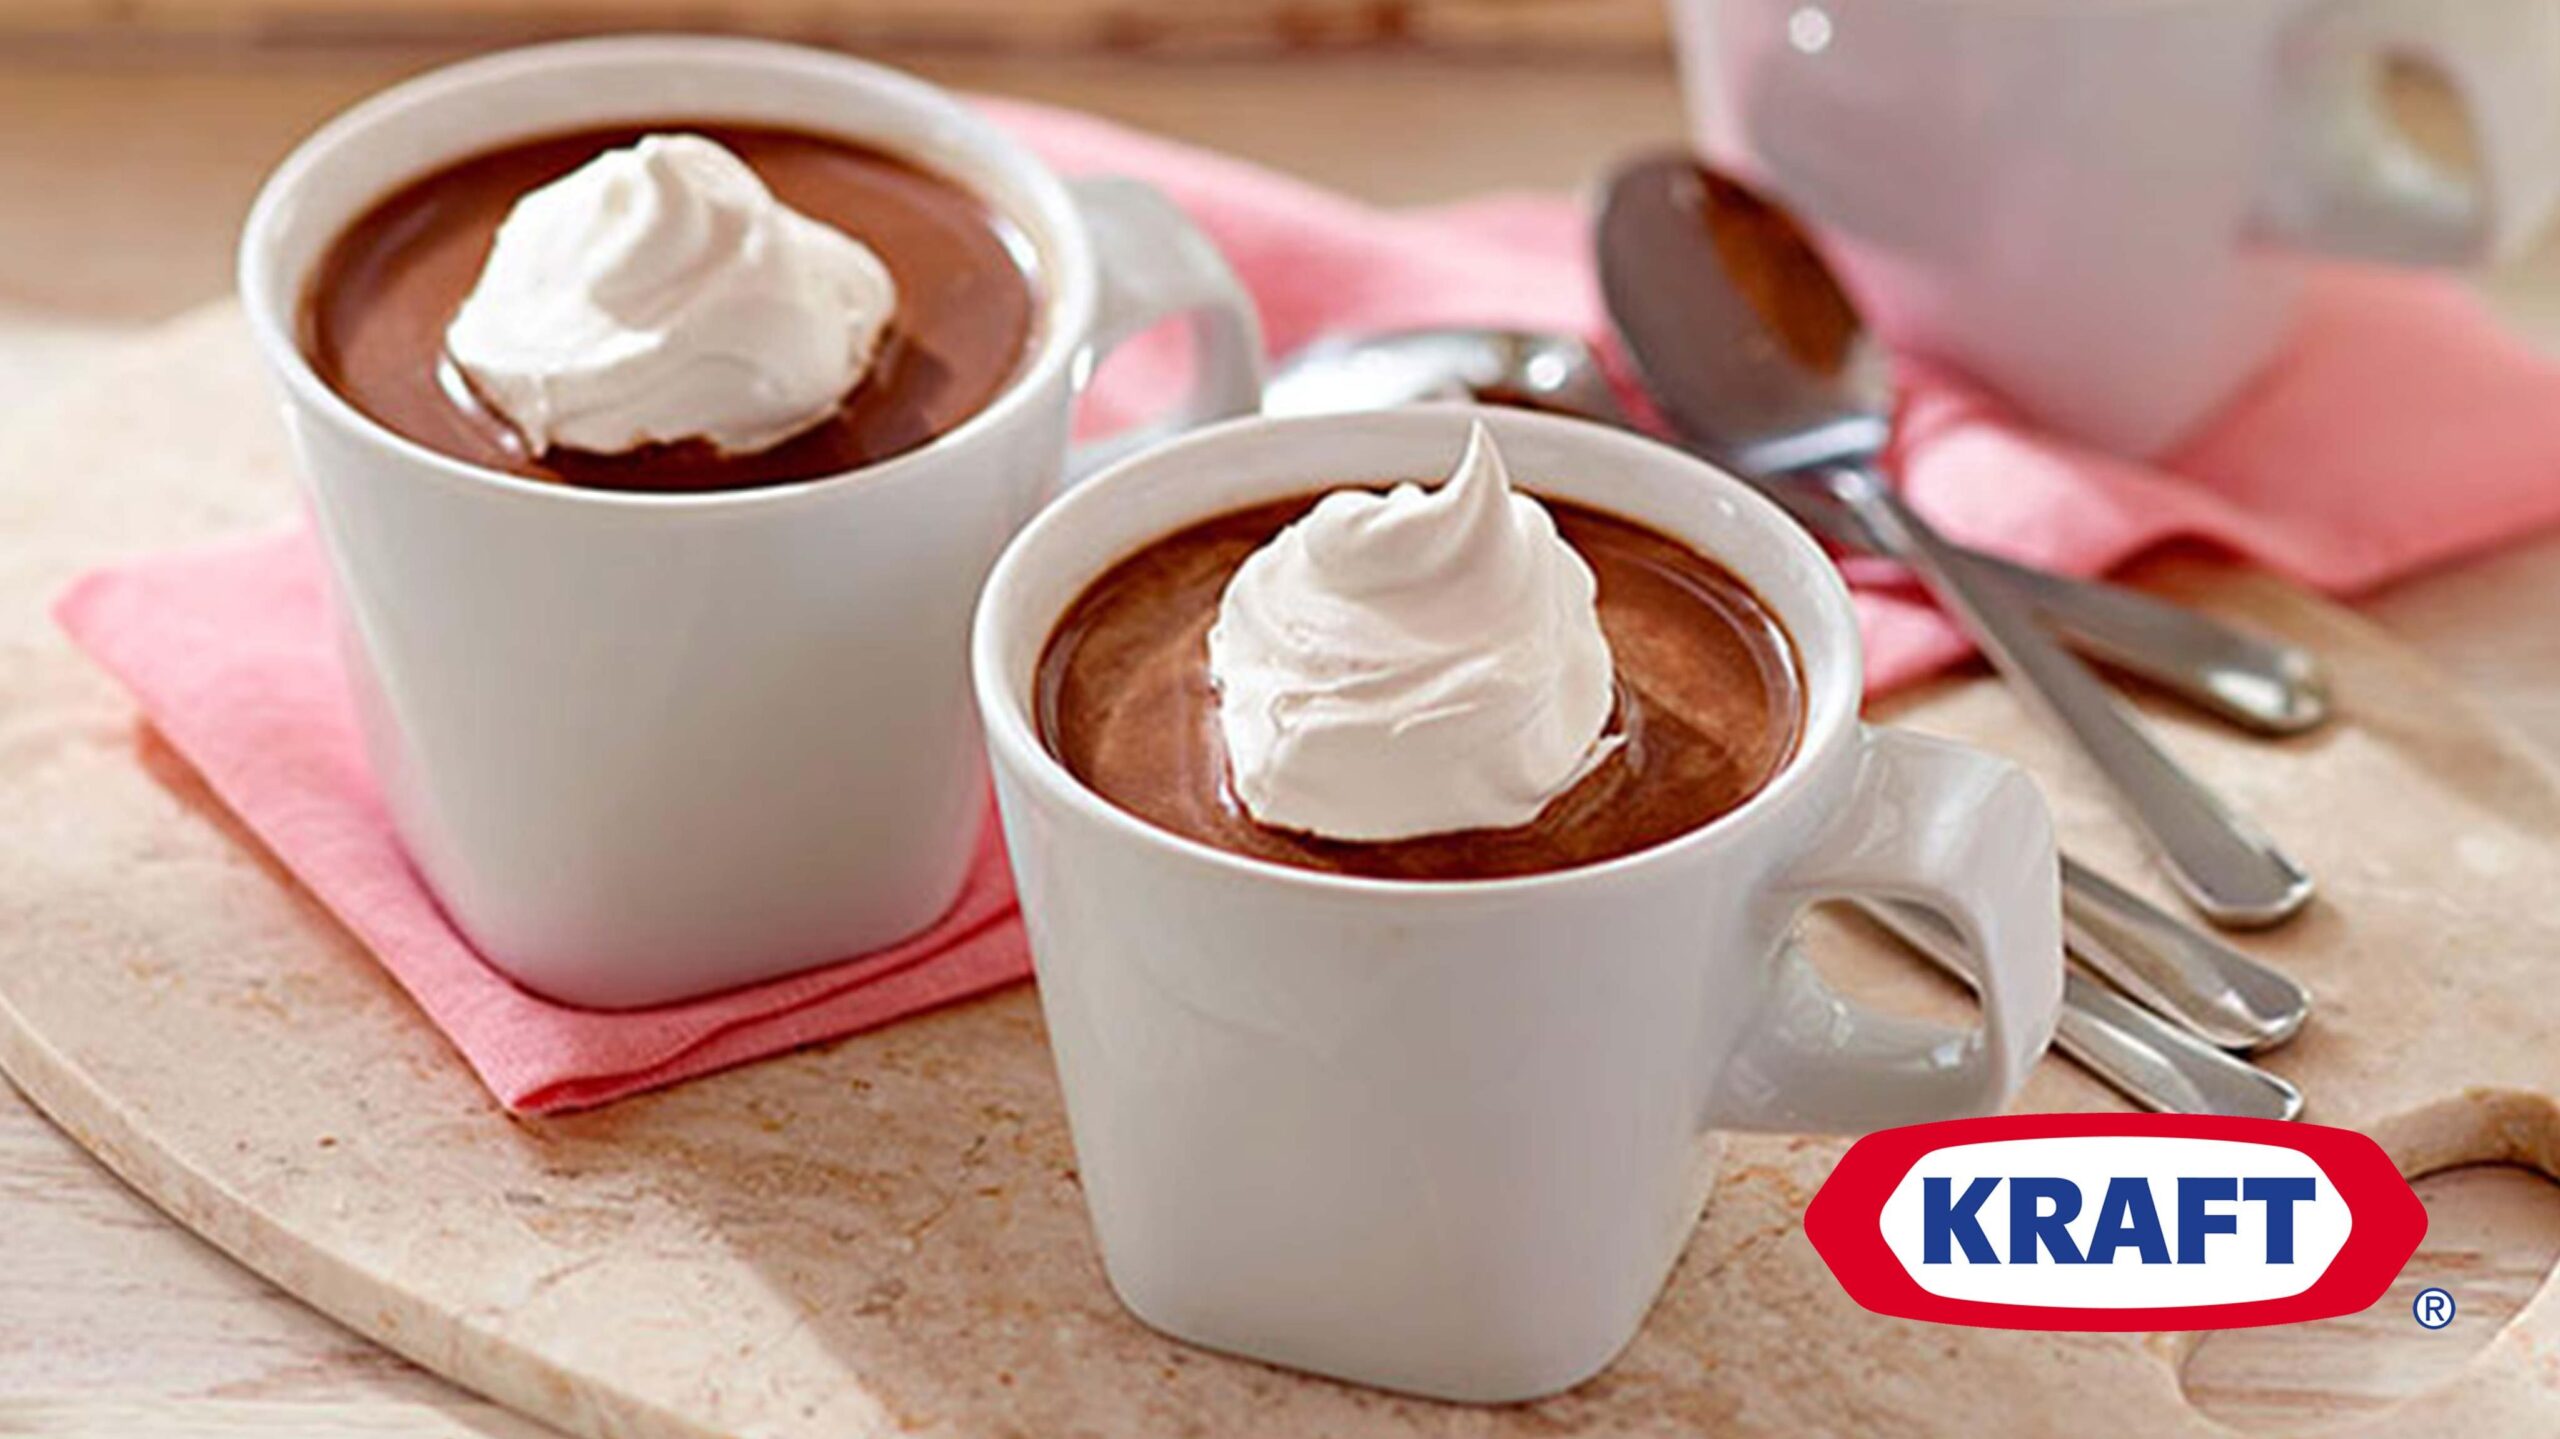  Let the rich aroma of chocolate and the nutty taste of almonds swirl your senses.